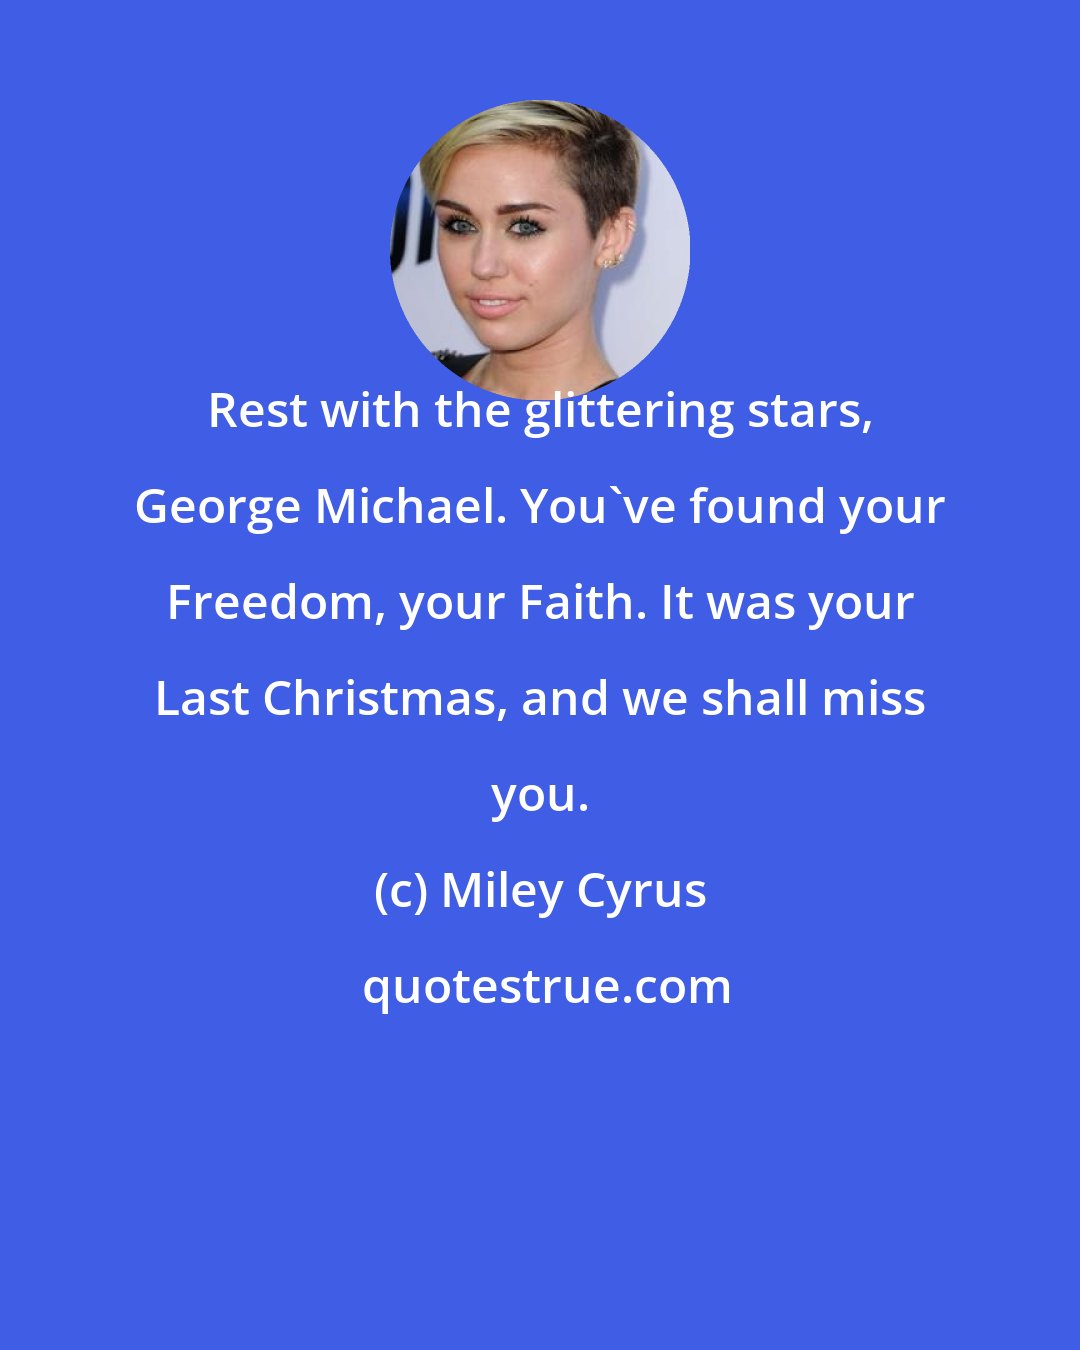 Miley Cyrus: Rest with the glittering stars, George Michael. You've found your Freedom, your Faith. It was your Last Christmas, and we shall miss you.